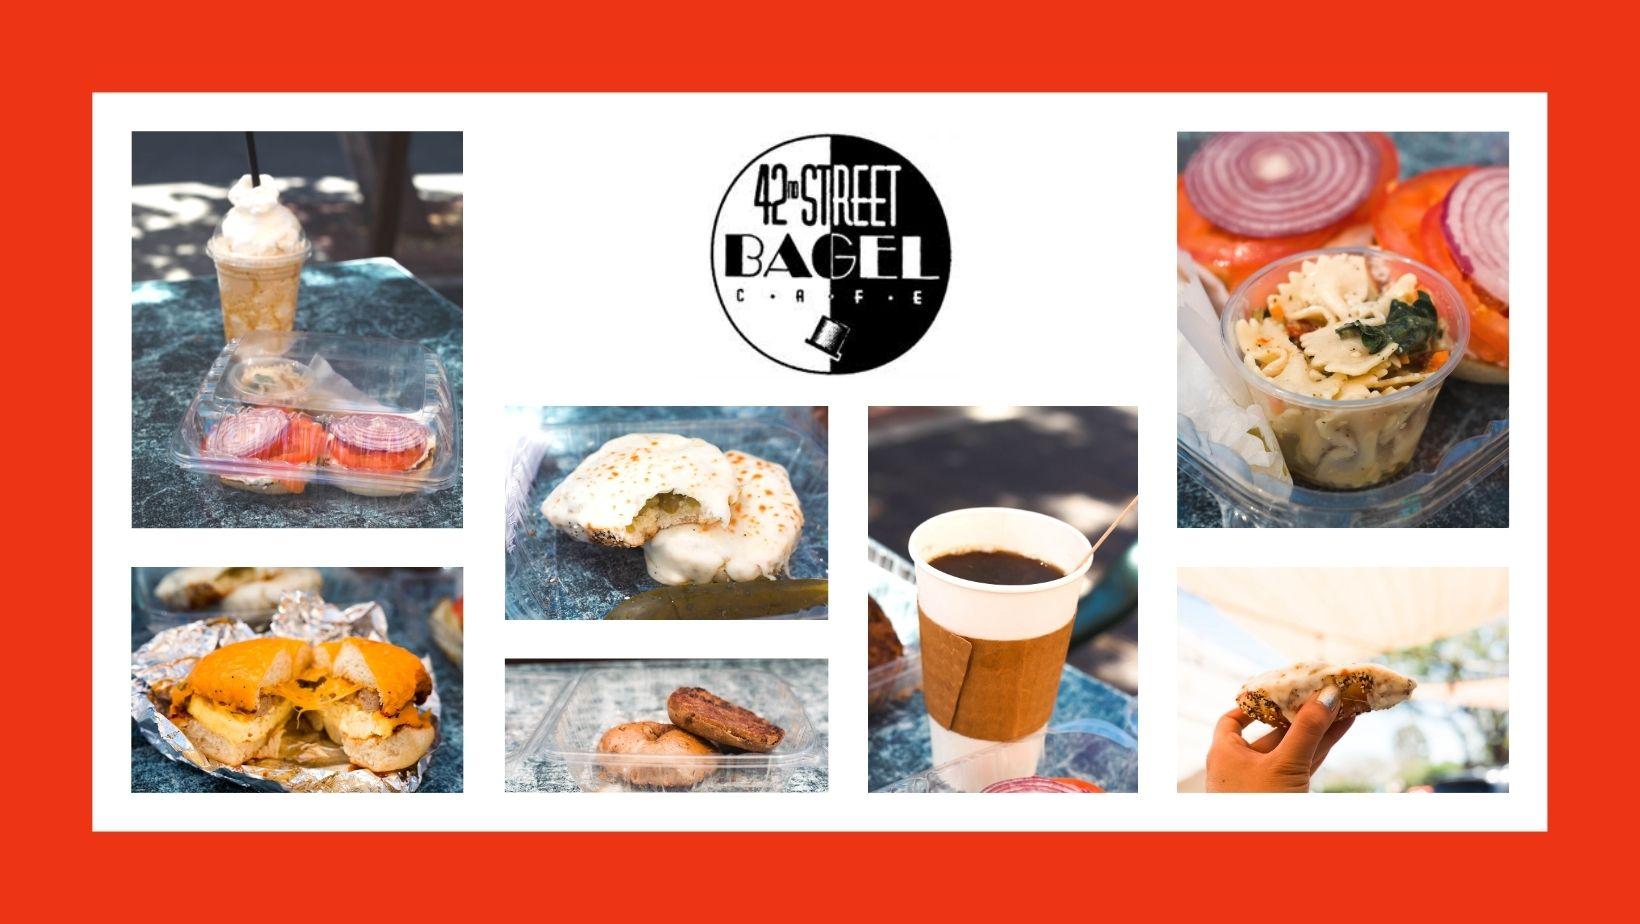 Collage of menu items from 42nd street Bagel Cafe, including breakfast foods, brunch foods and coffee.

